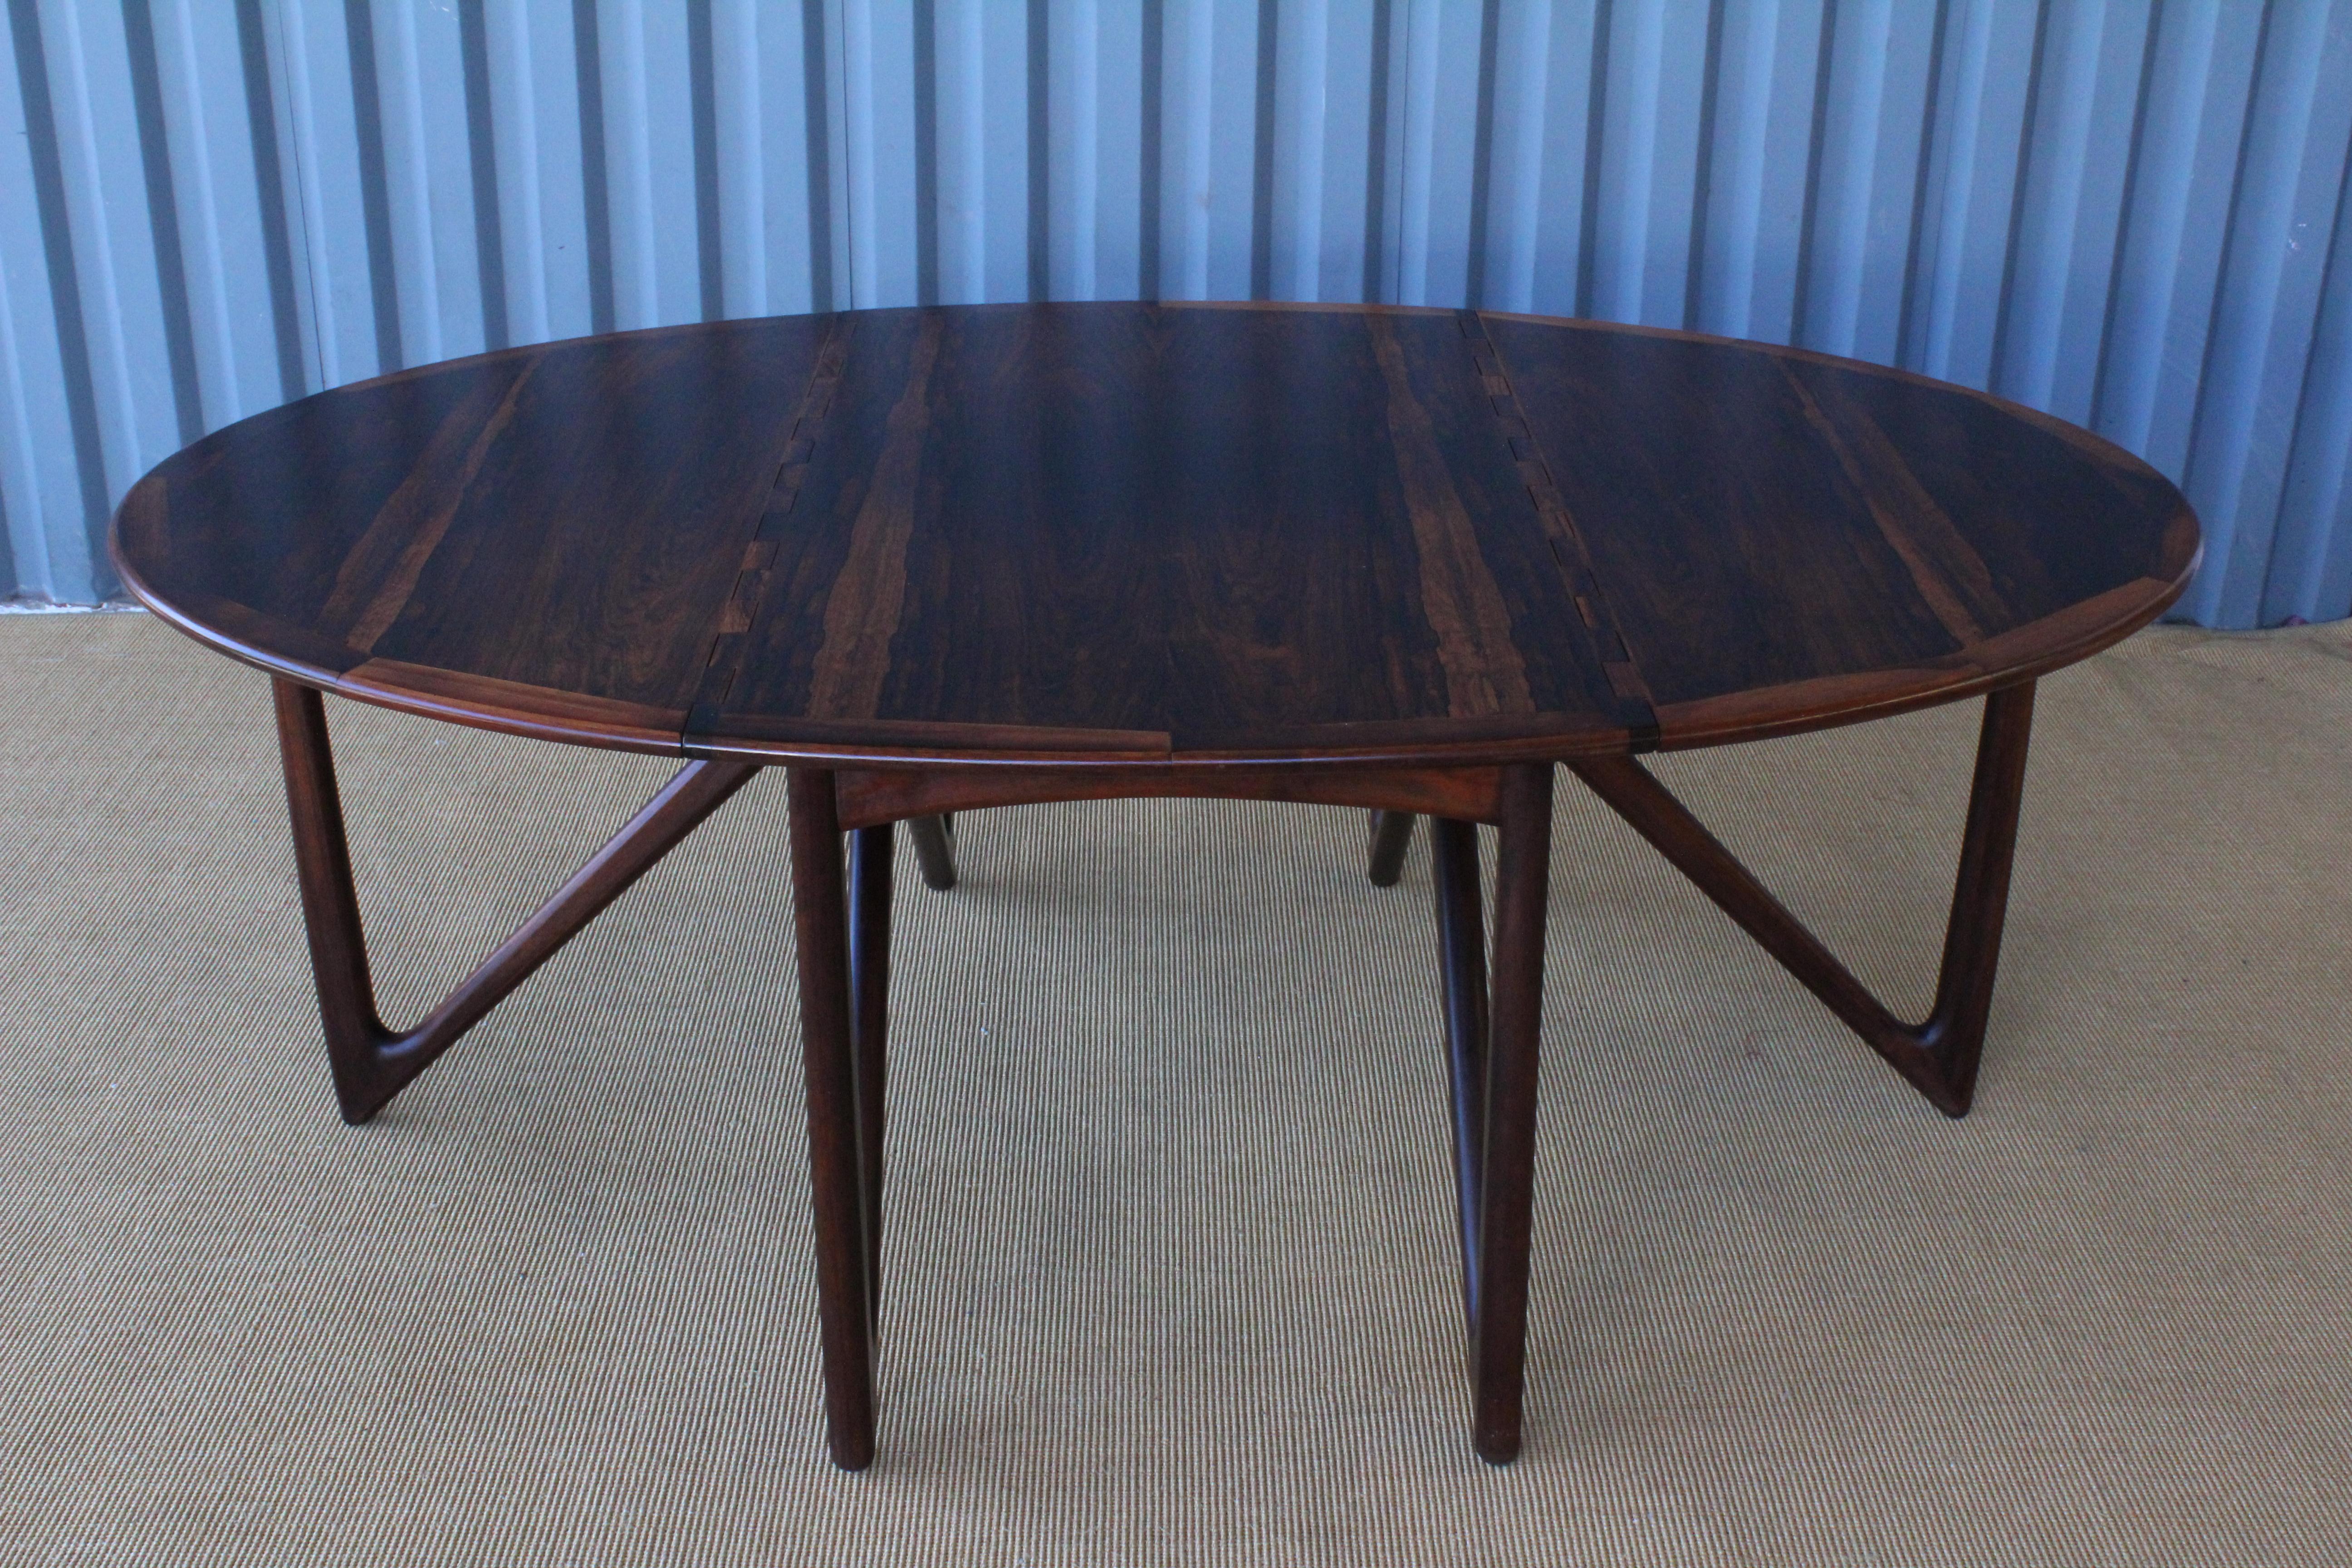 Beautiful dining table in stunning rosewood, designed by Niels Koefoed in Denmark in the 1960s. This tables features two drop leave extensions and folding legs. Wonderful condition with a few minor veneer touch ups. Please see detailed photos of